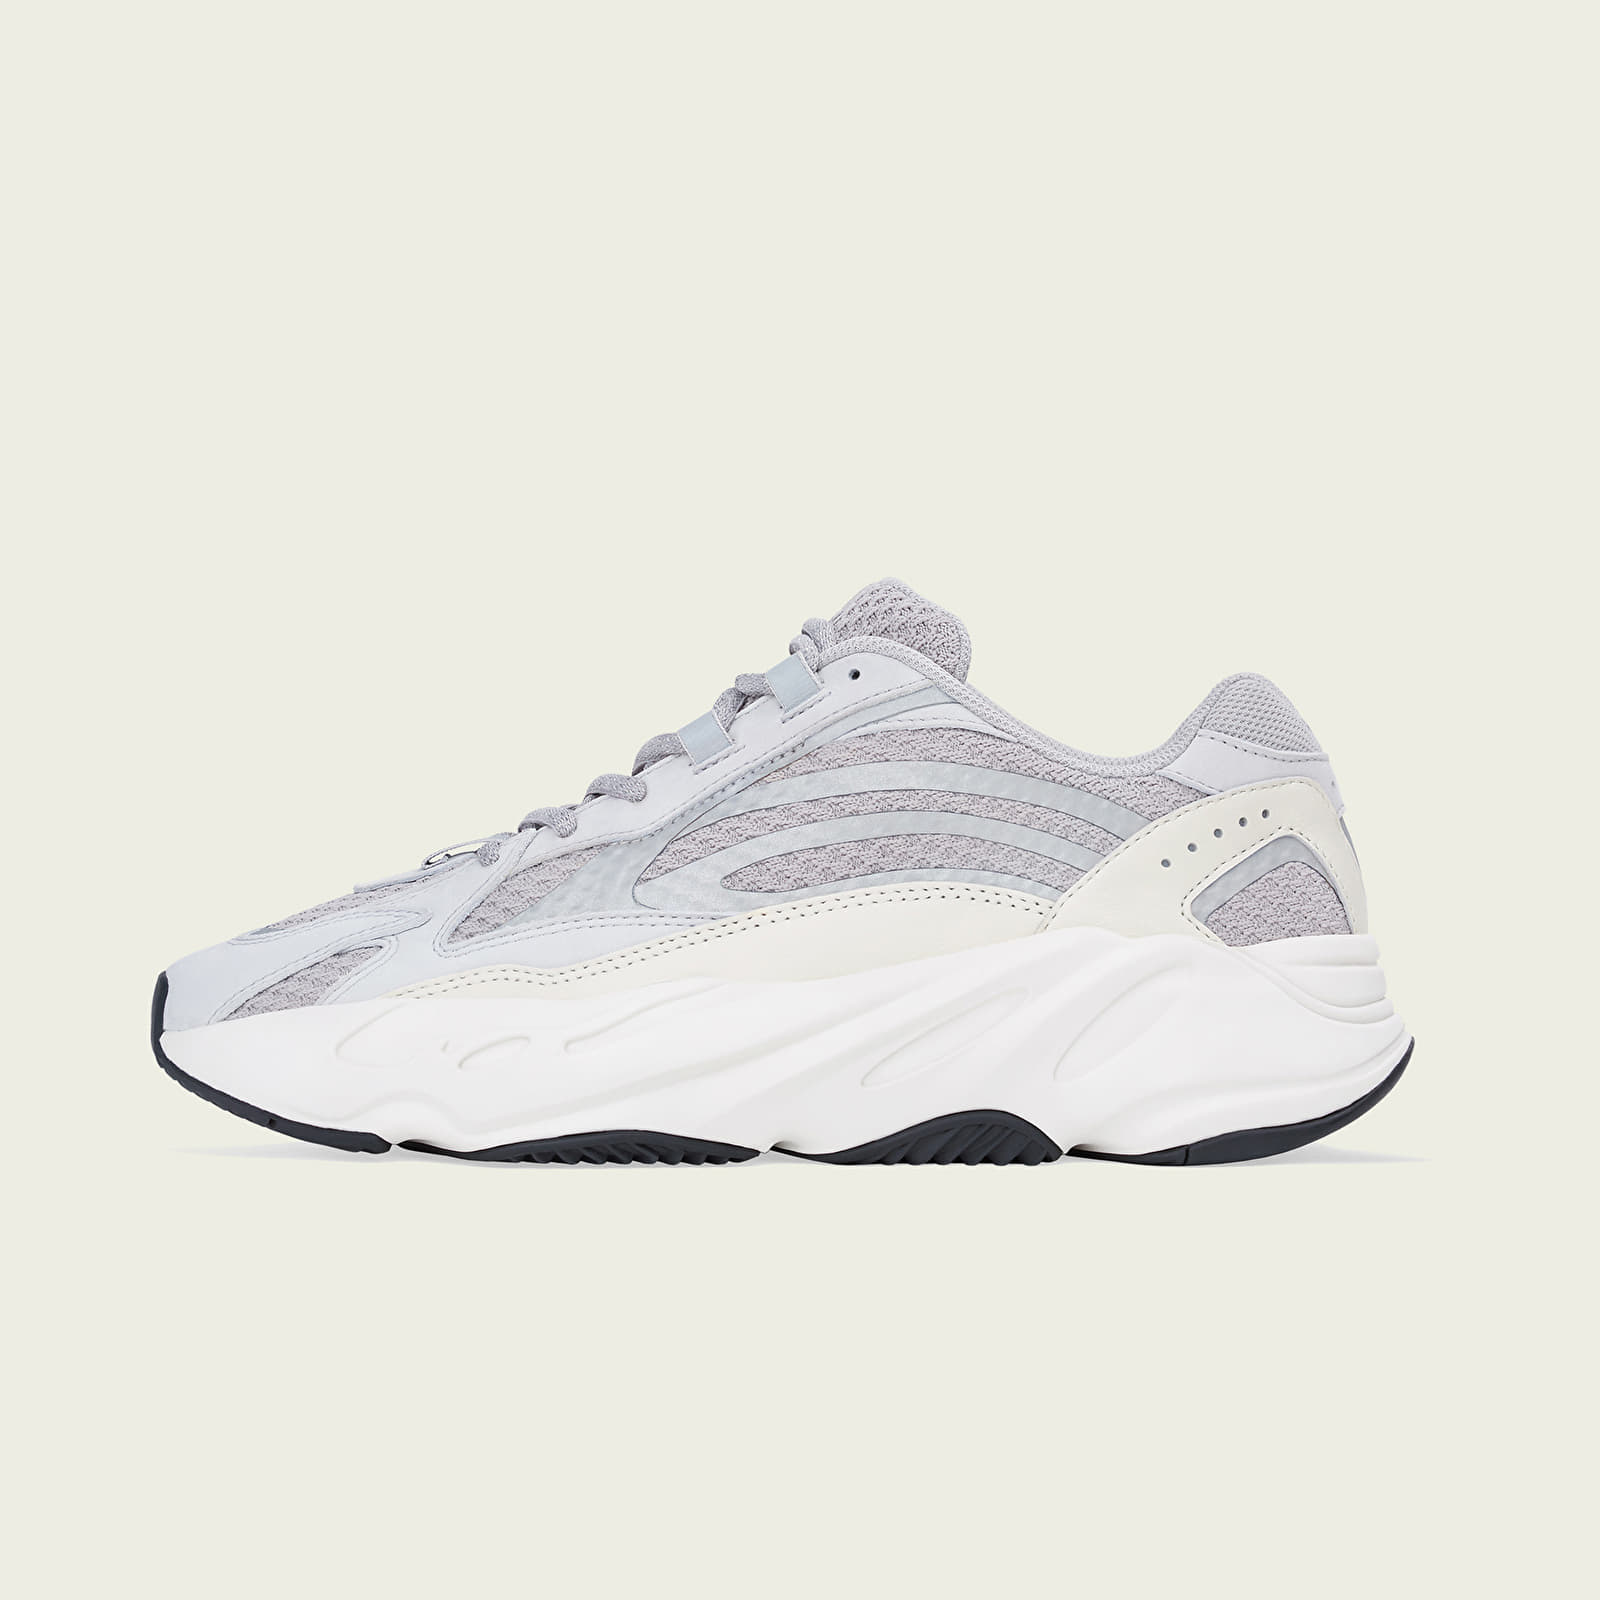 Men's shoes adidas Yeezy Boost 700 V2 Static/ Static/ Static